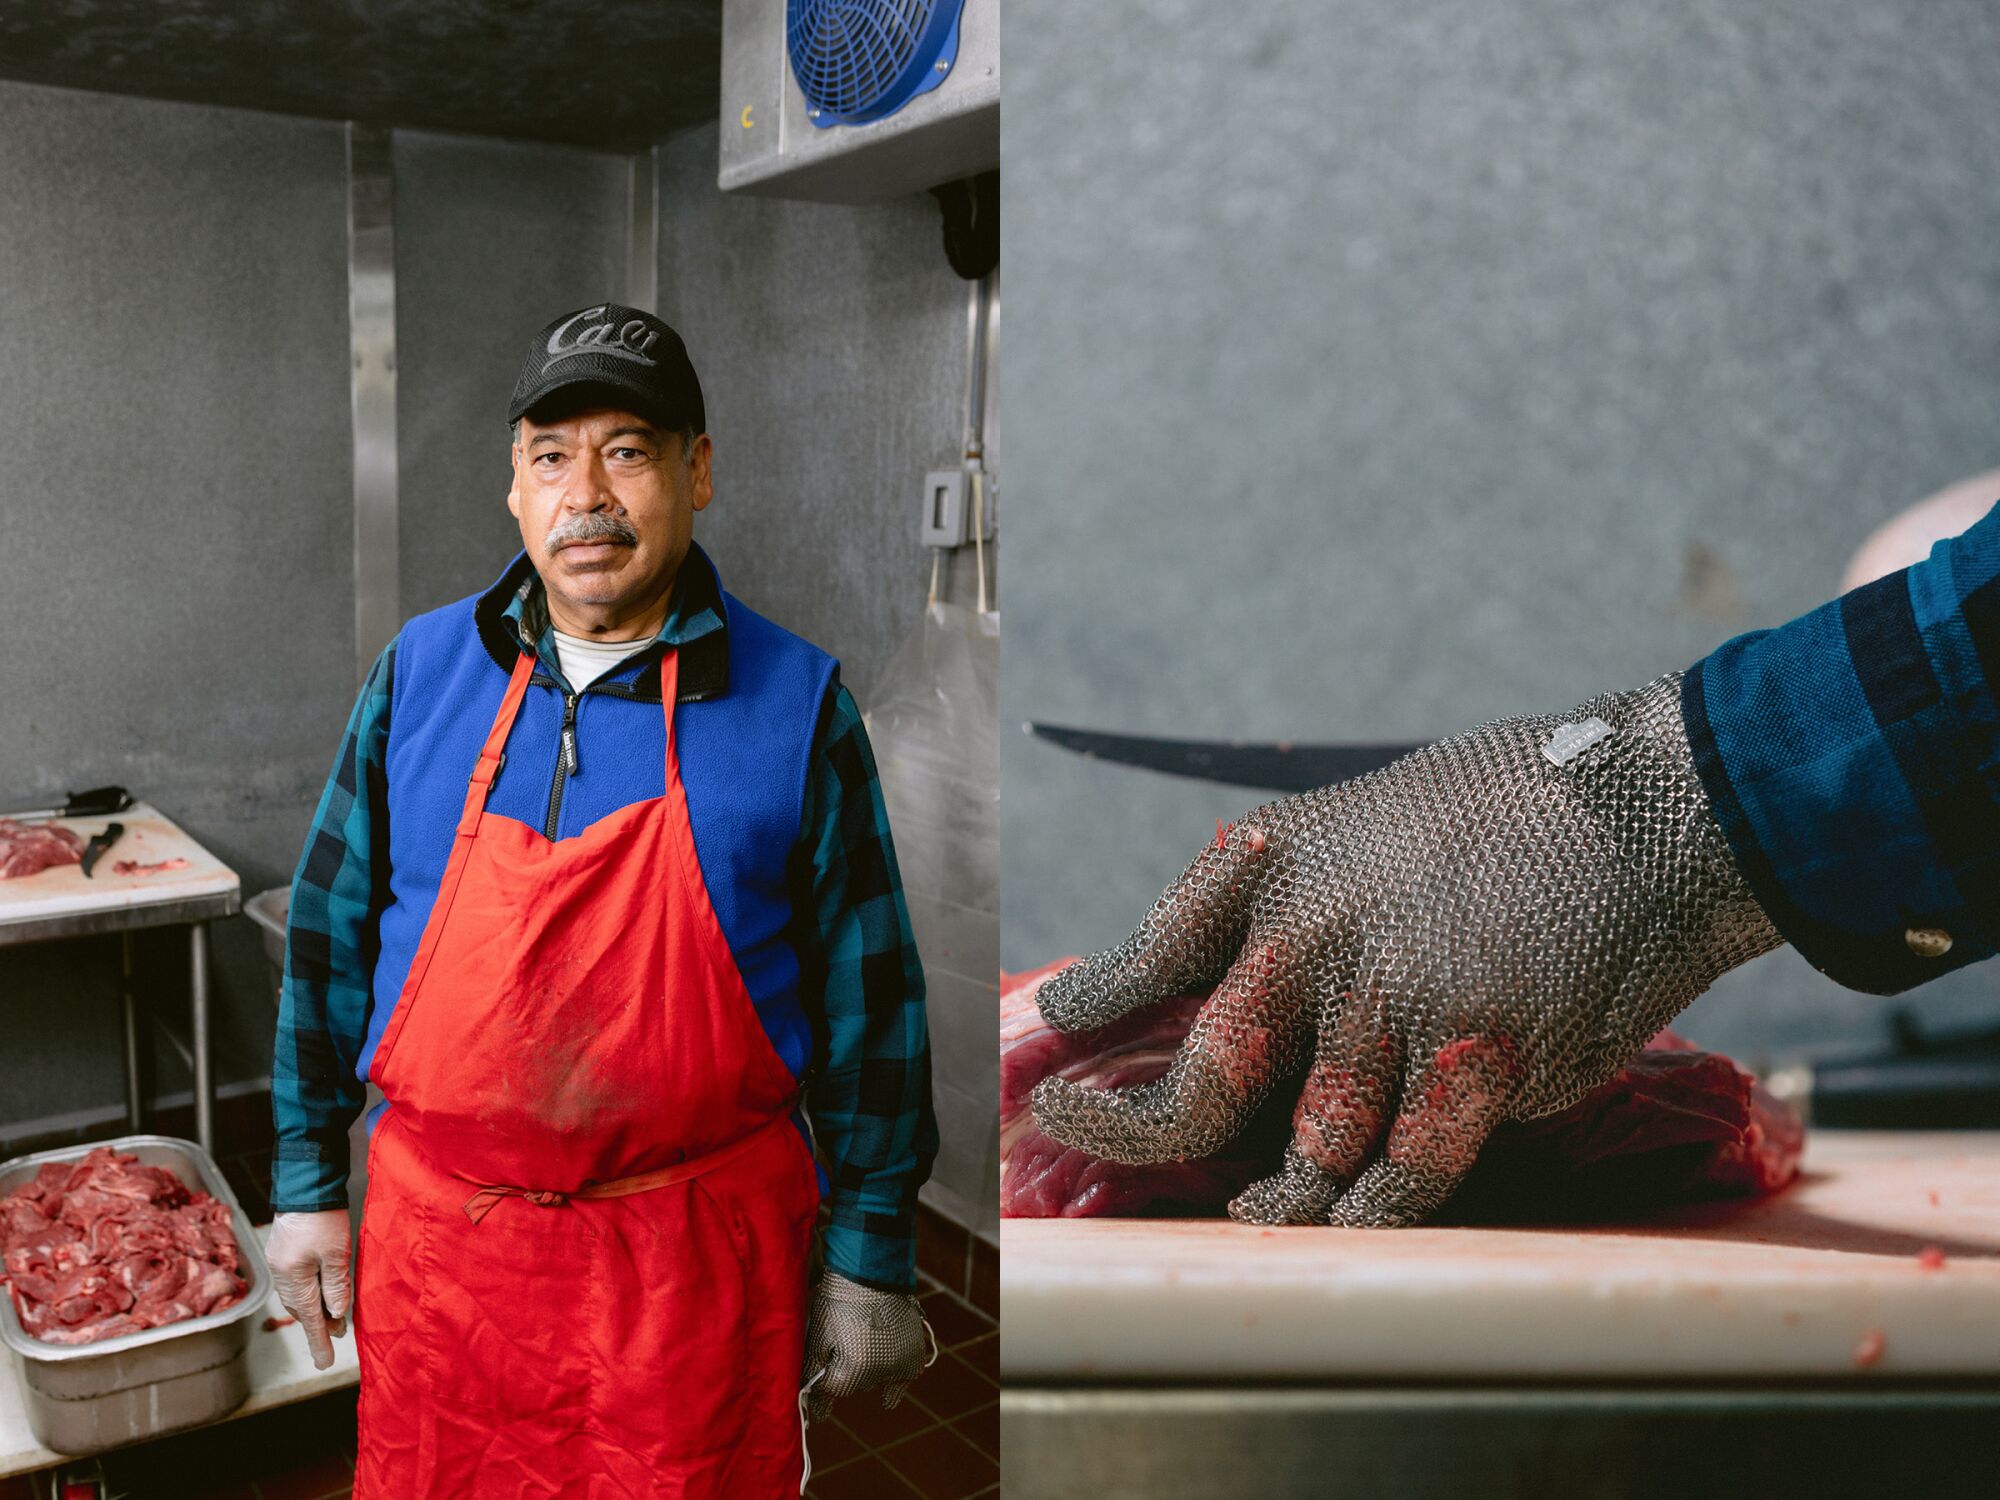 Two images side by side of a portrait of a man, left, and a steely-gloved hand cutting meat.